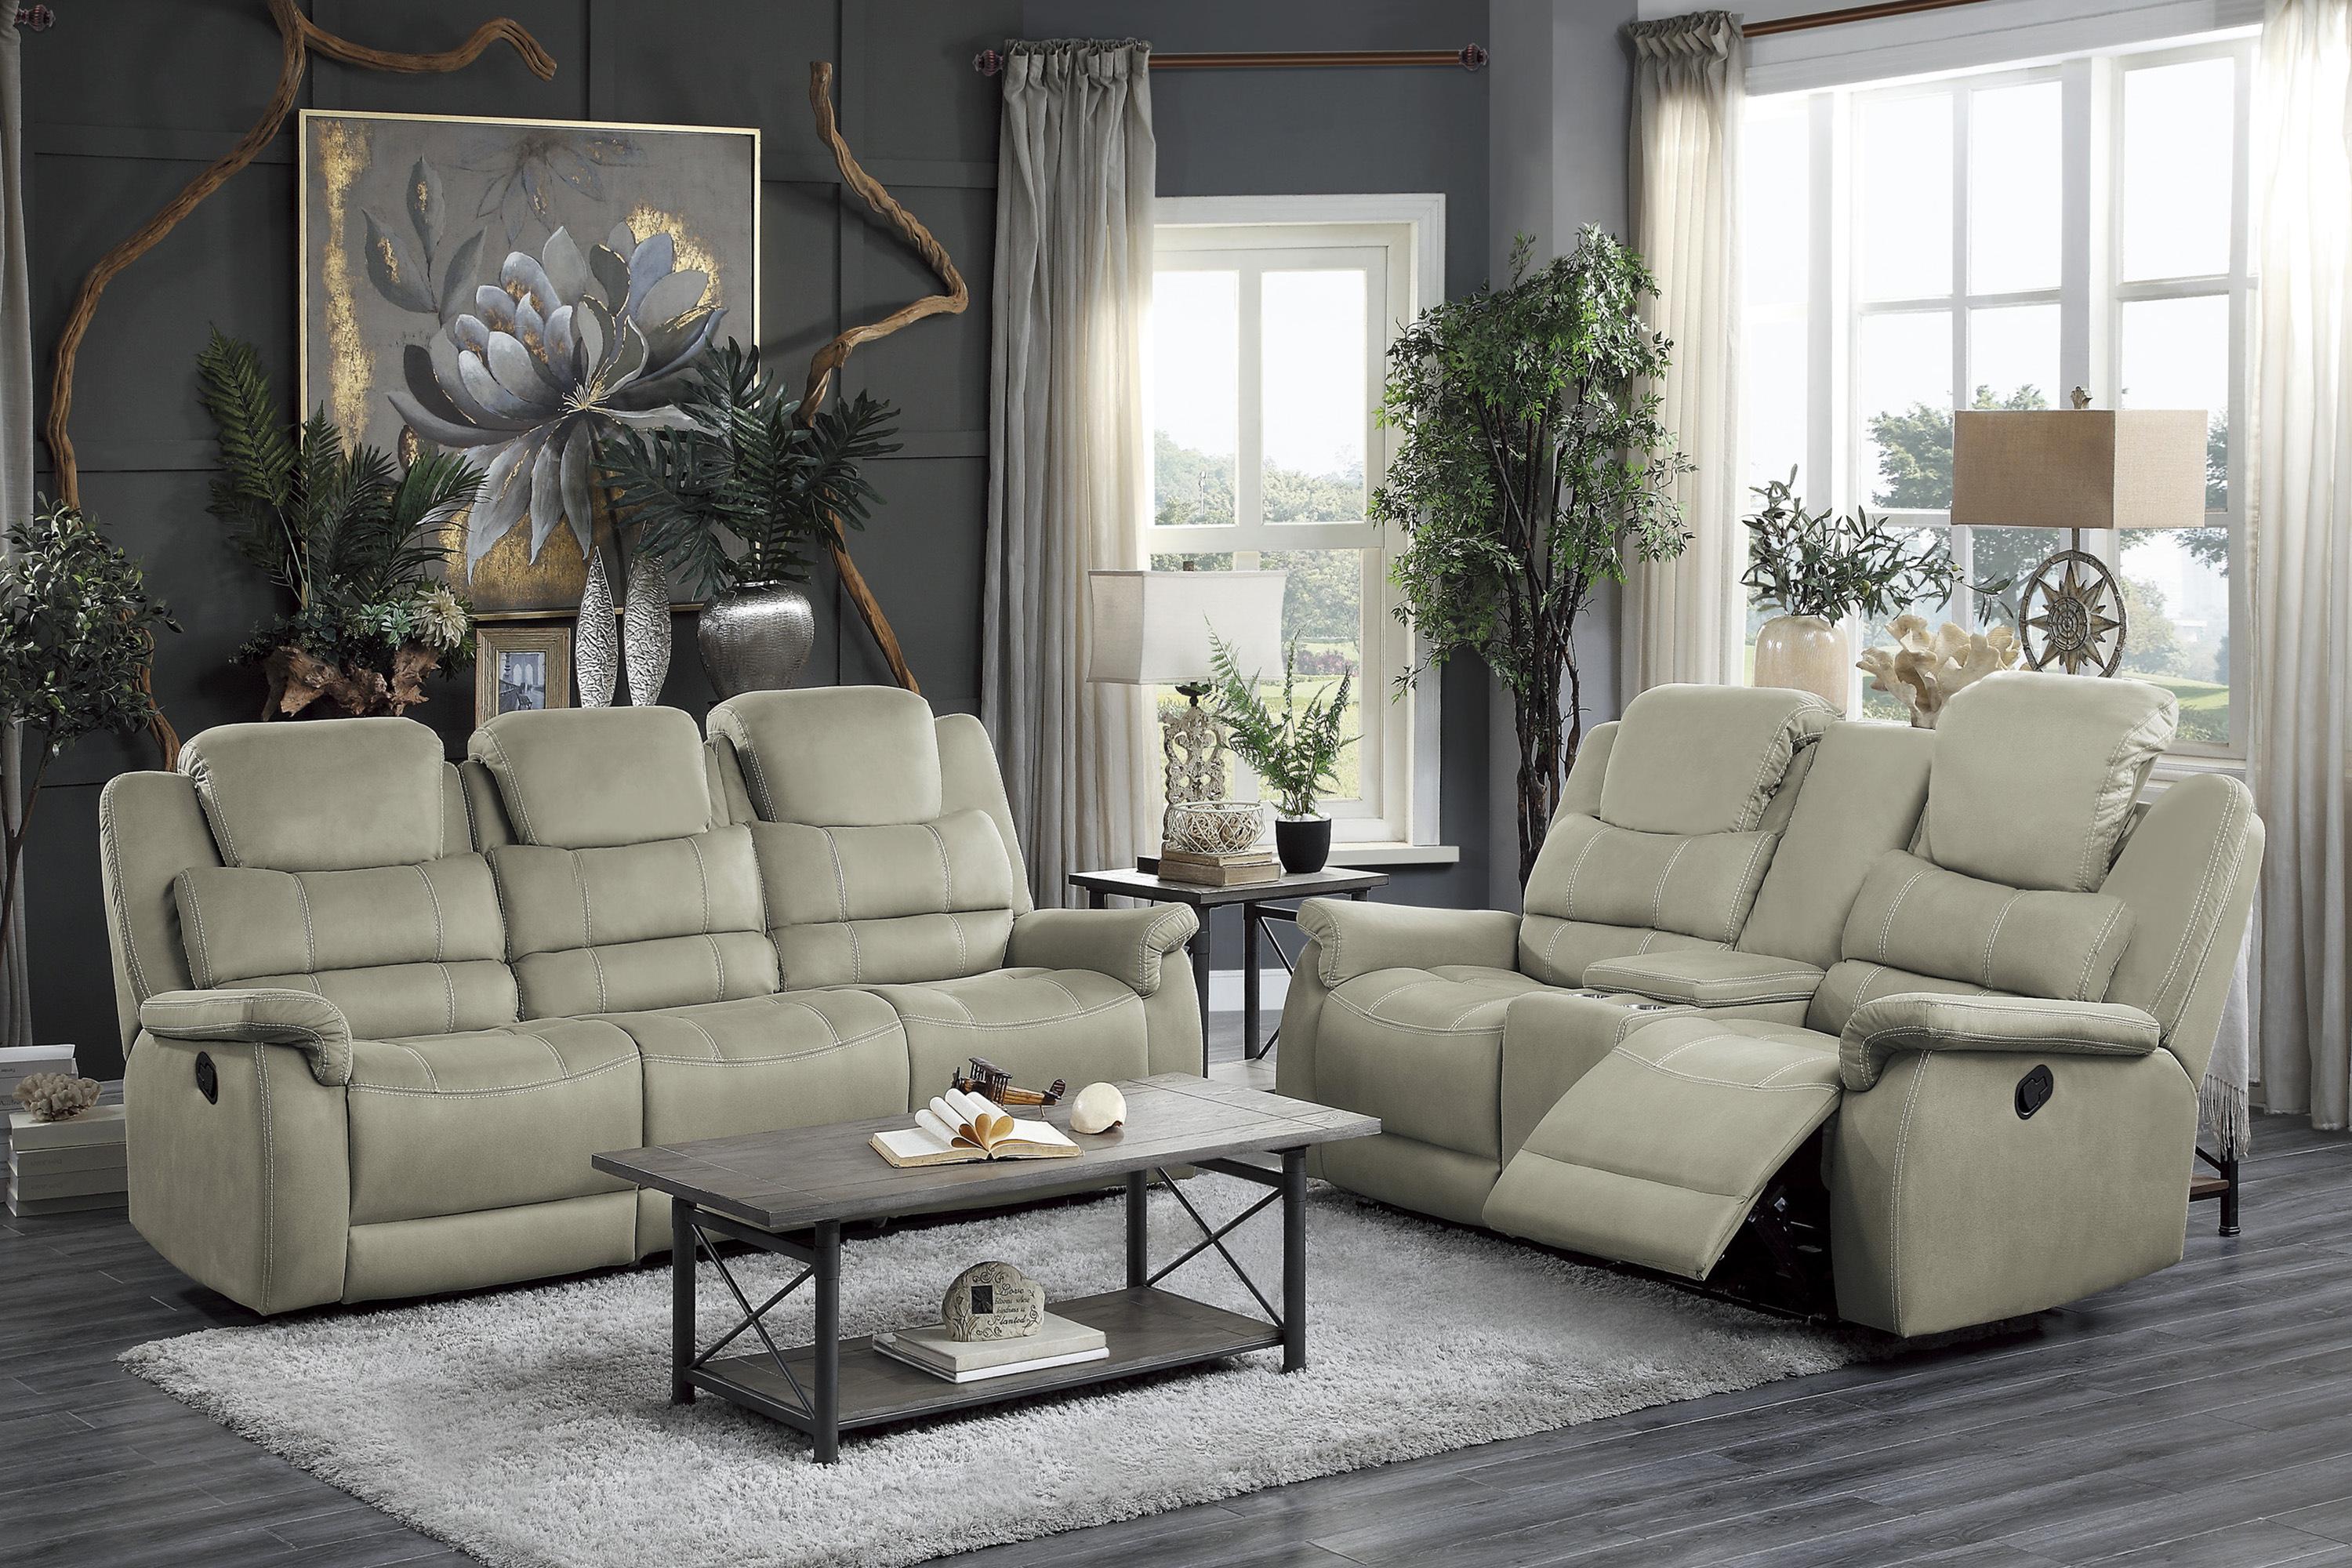 Transitional Reclining Set 9848GY-2PC Shola 9848GY-2PC in Gray Microfiber